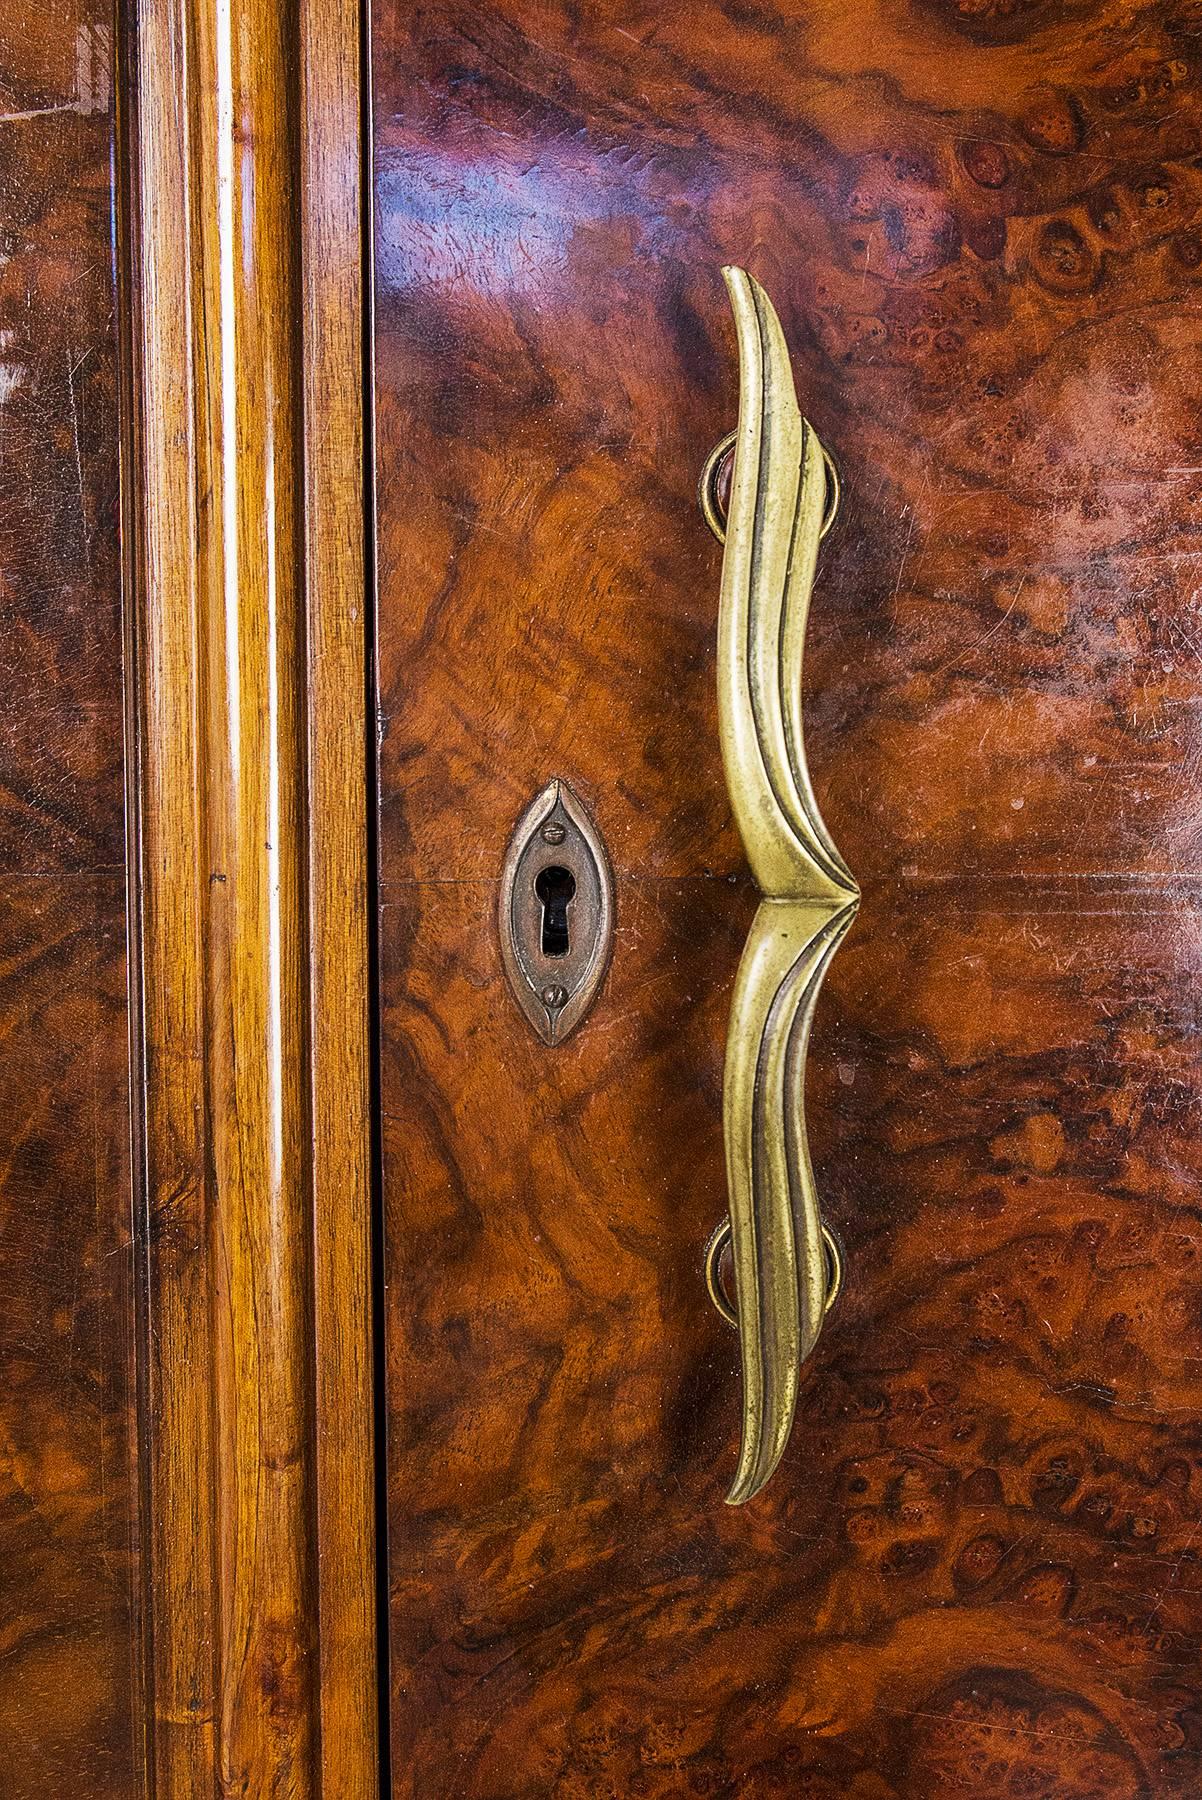 Extraordinary armoire in walnut root with brass handles designed by Tomaso Buzzi for Il Labirinto in the 1930s. Carved and applied wooden details attributable to the work of Guido Balsamo Stella.
Guido Balsamo Stella was the director of the